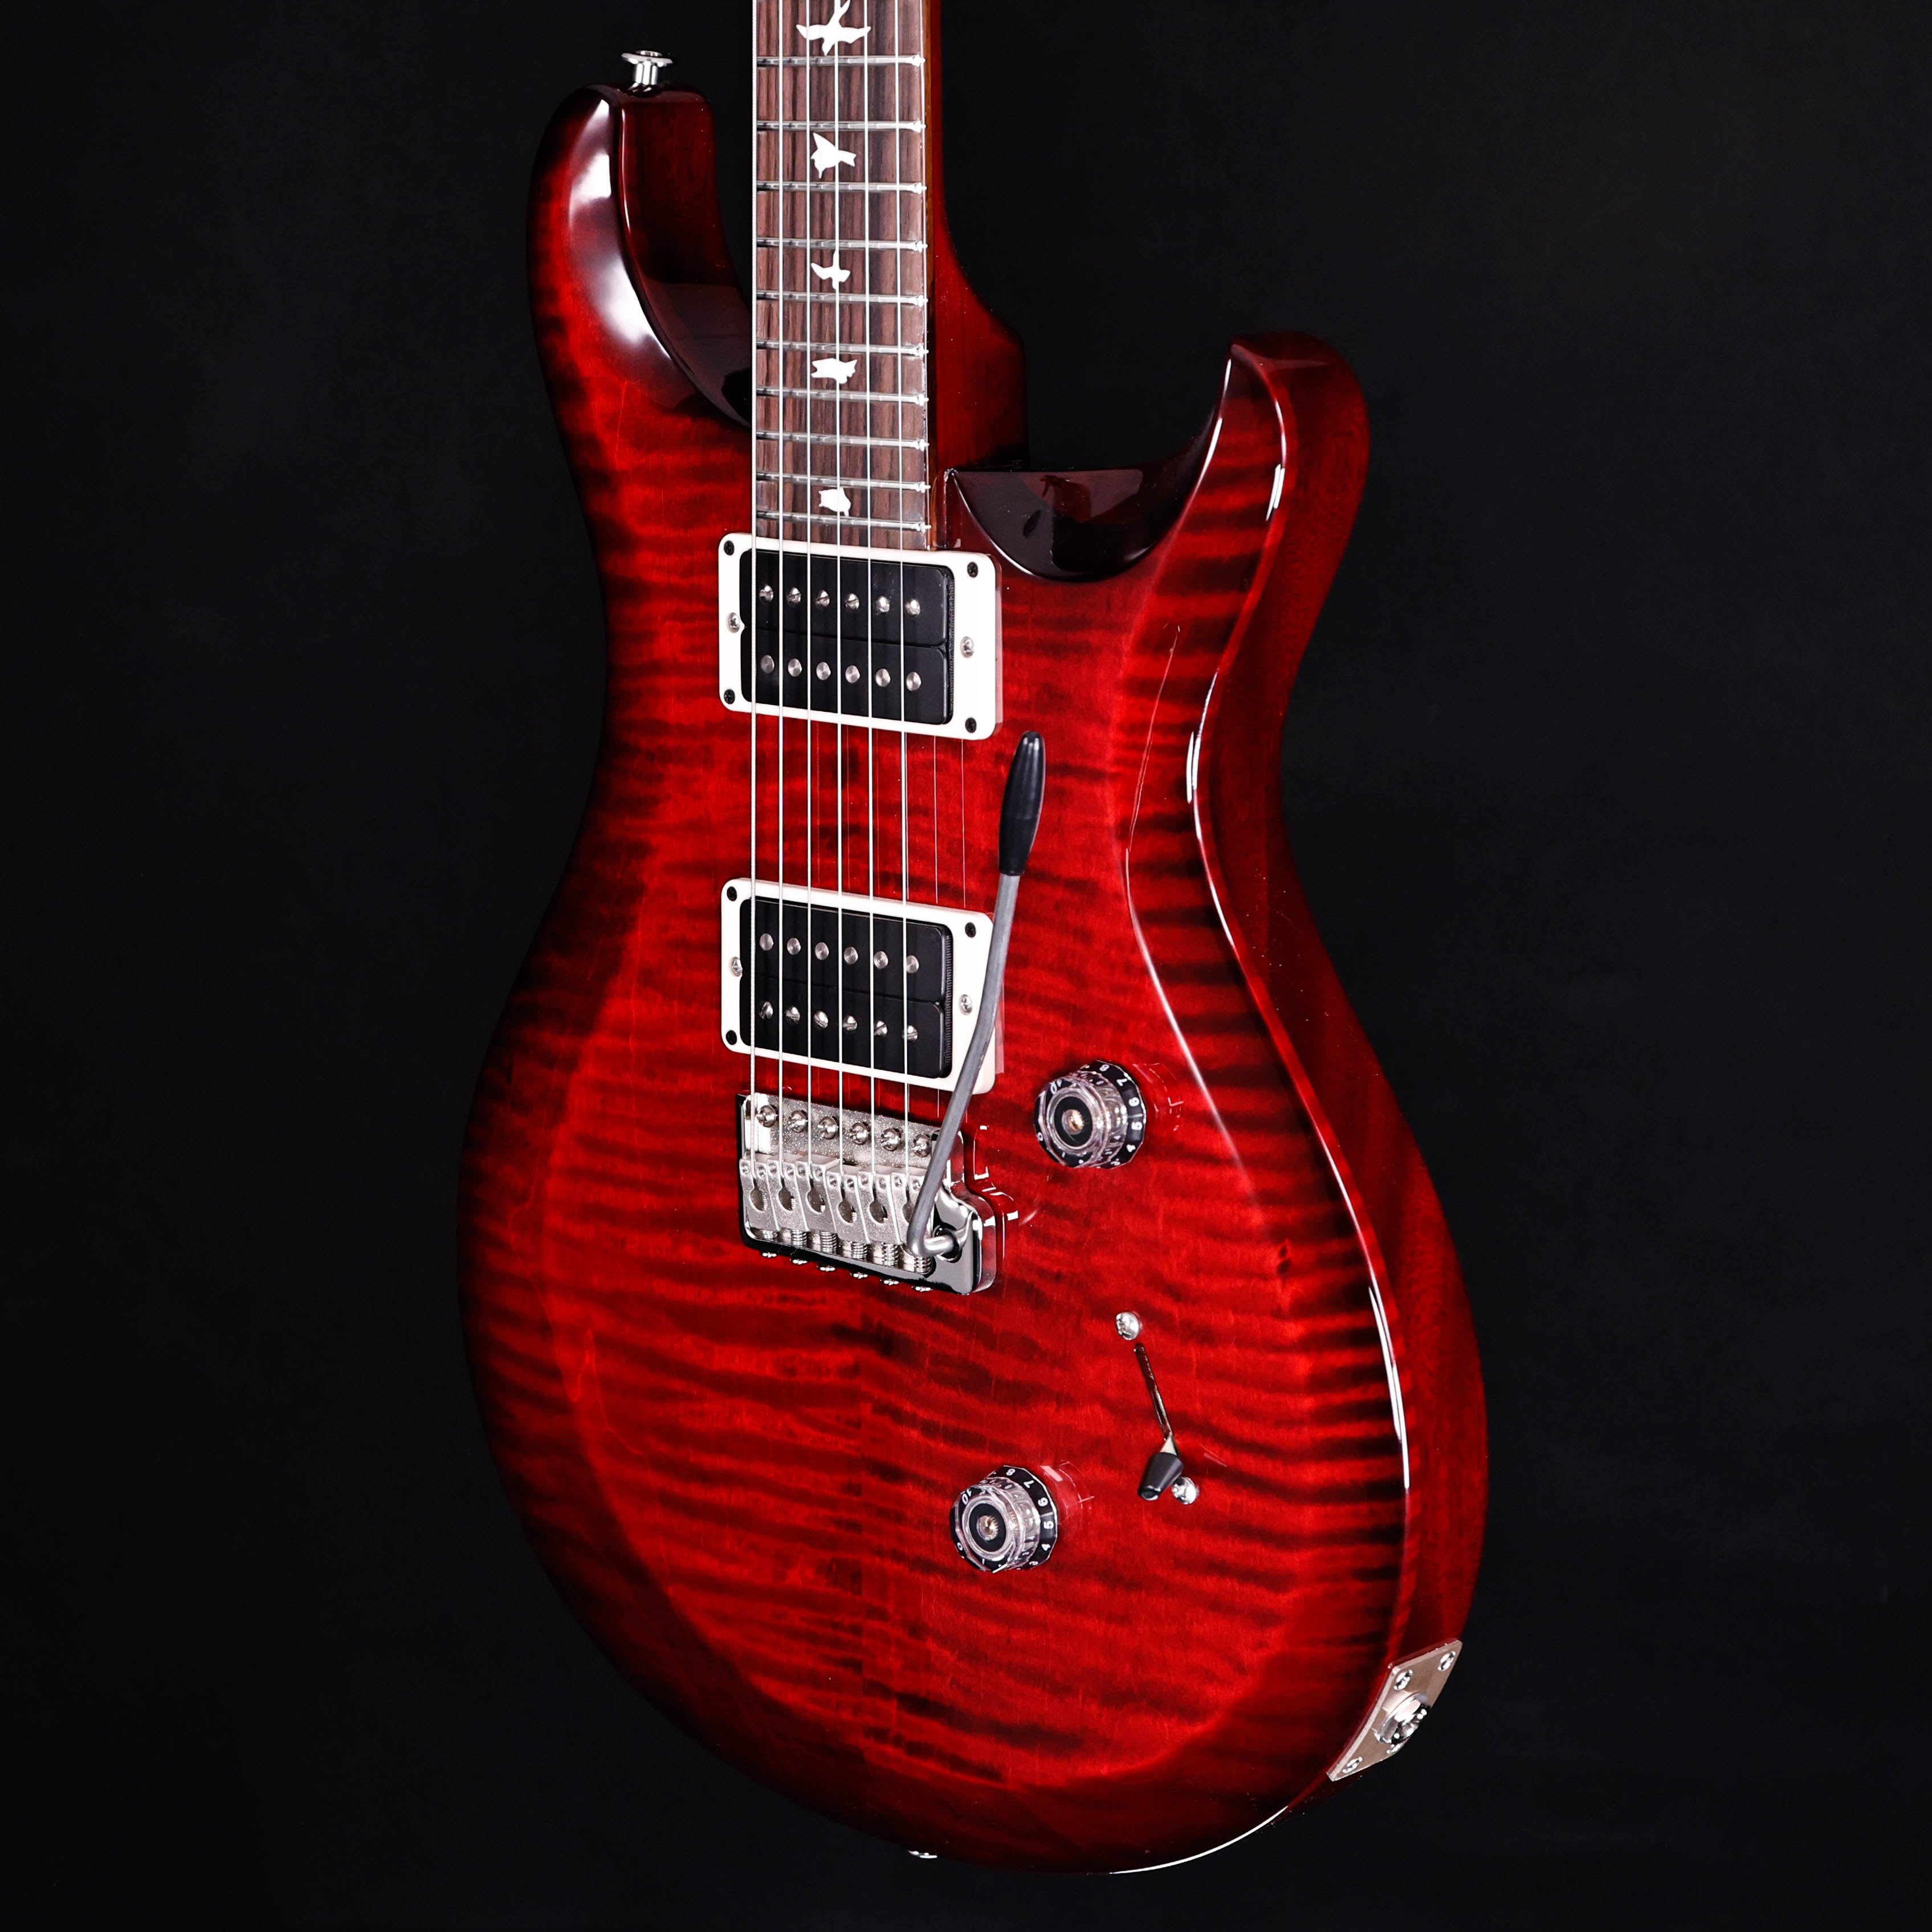 PRS Paul Reed Smith S2 Custom 24 Electric, Fire Red Burst 8lbs 2.4oz